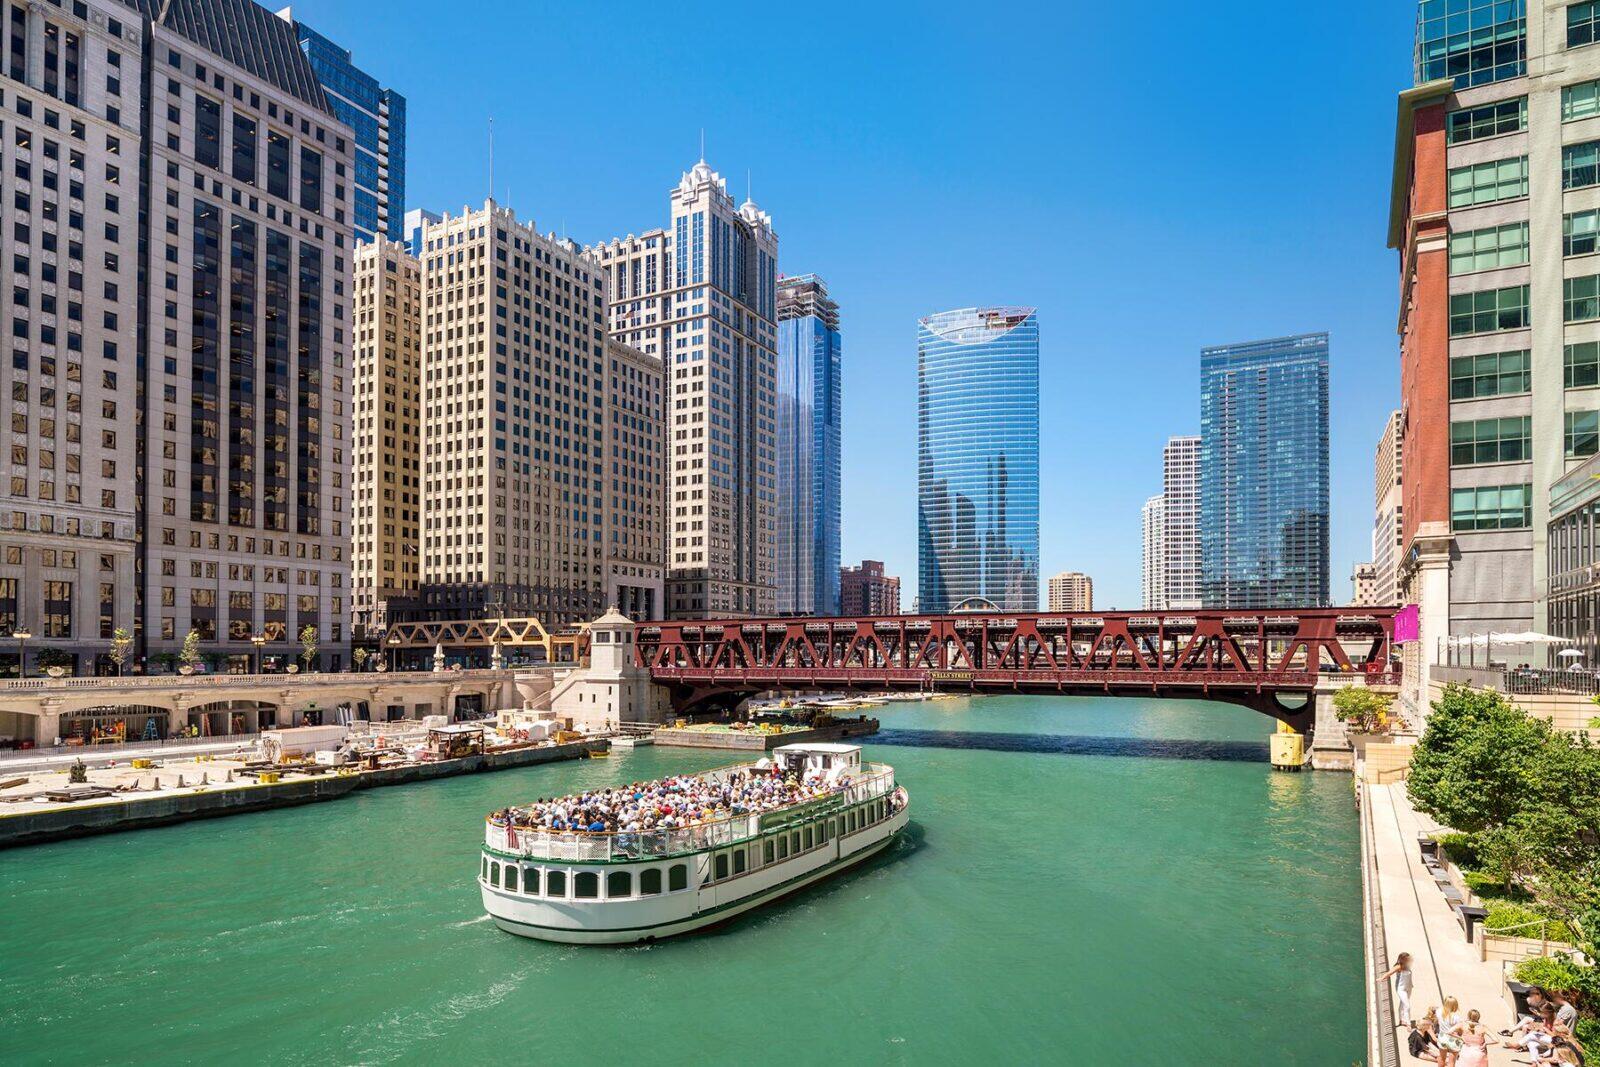 Top 23 Attractions & Things to Do in Chicago Fodors Travel Guide